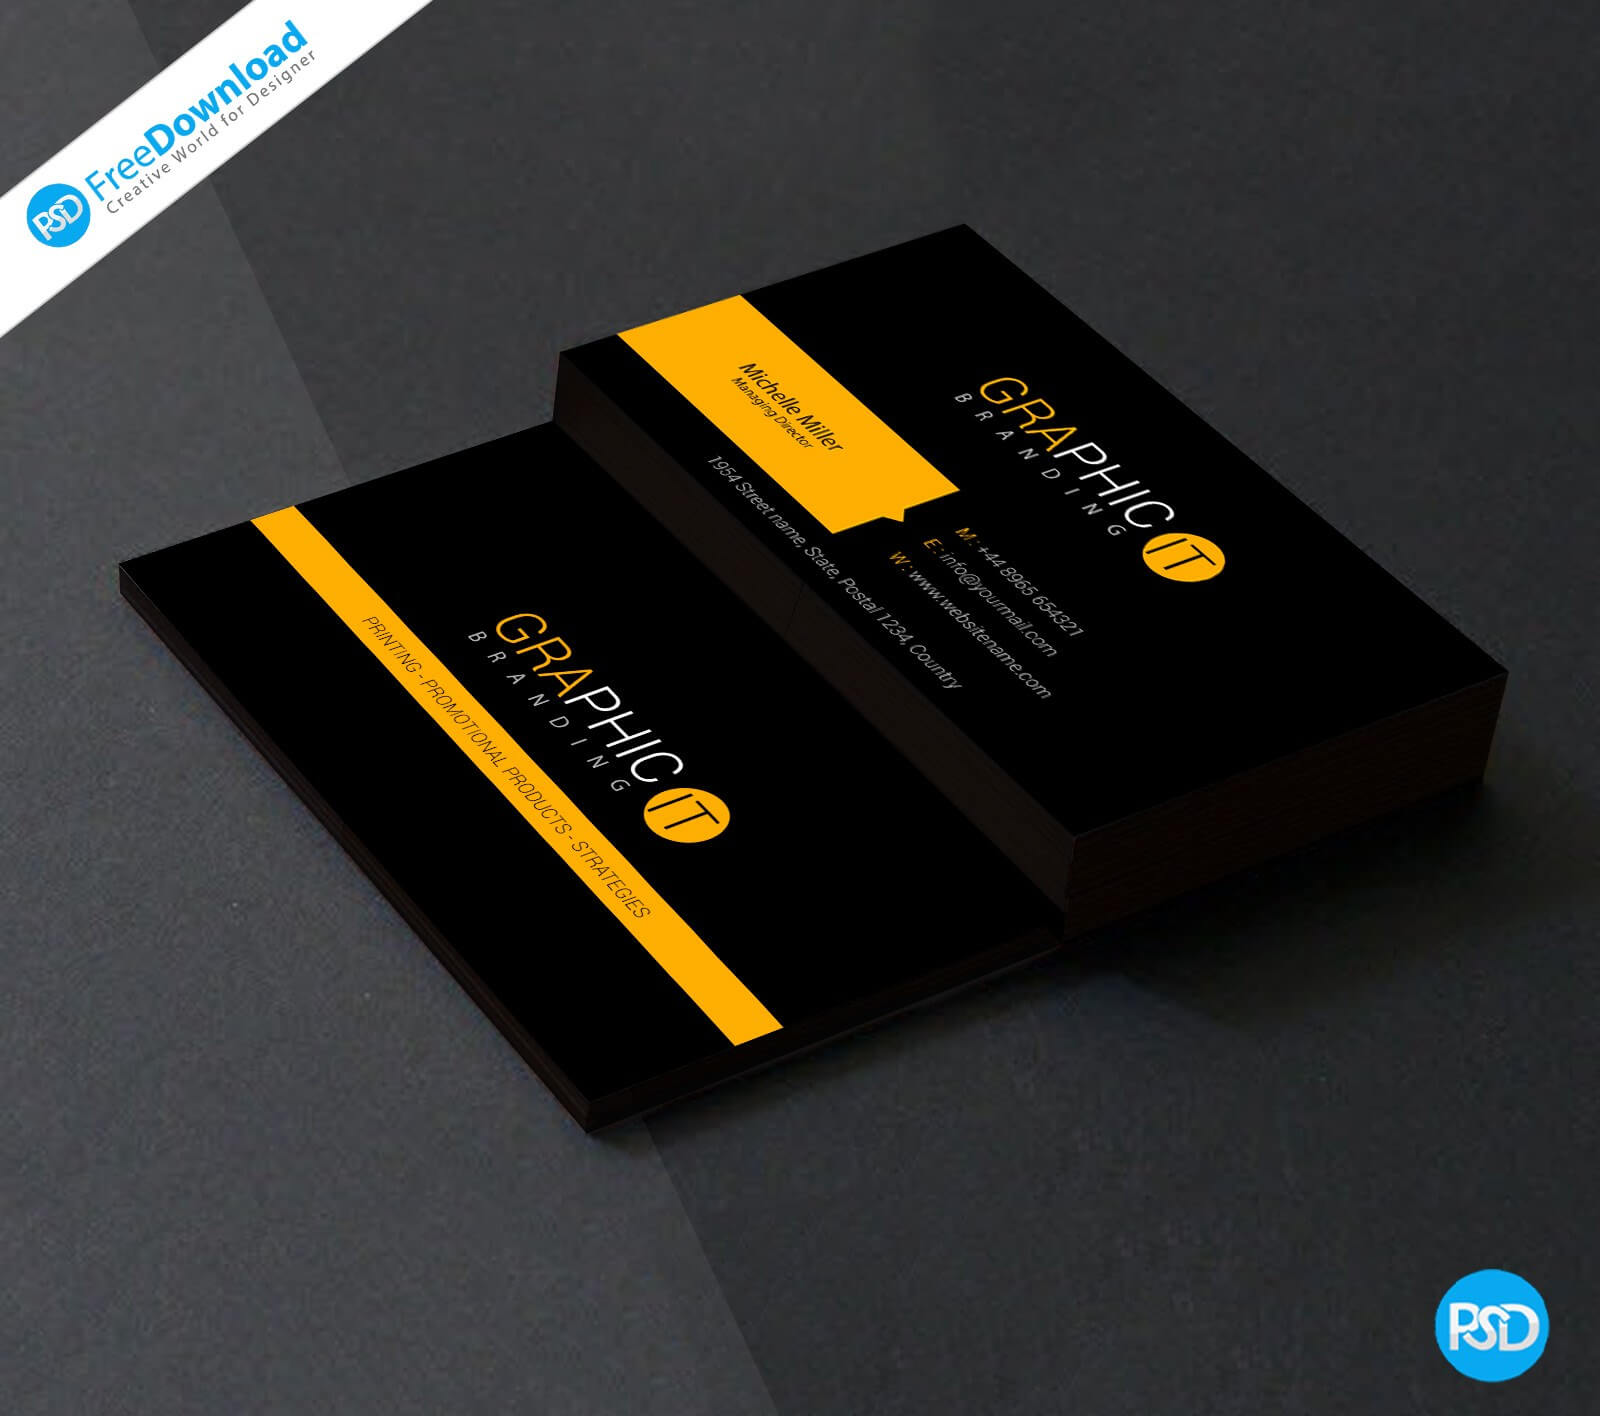 010 Blank Business Card Template Photoshop Free Download Inside Visiting Card Templates For Photoshop